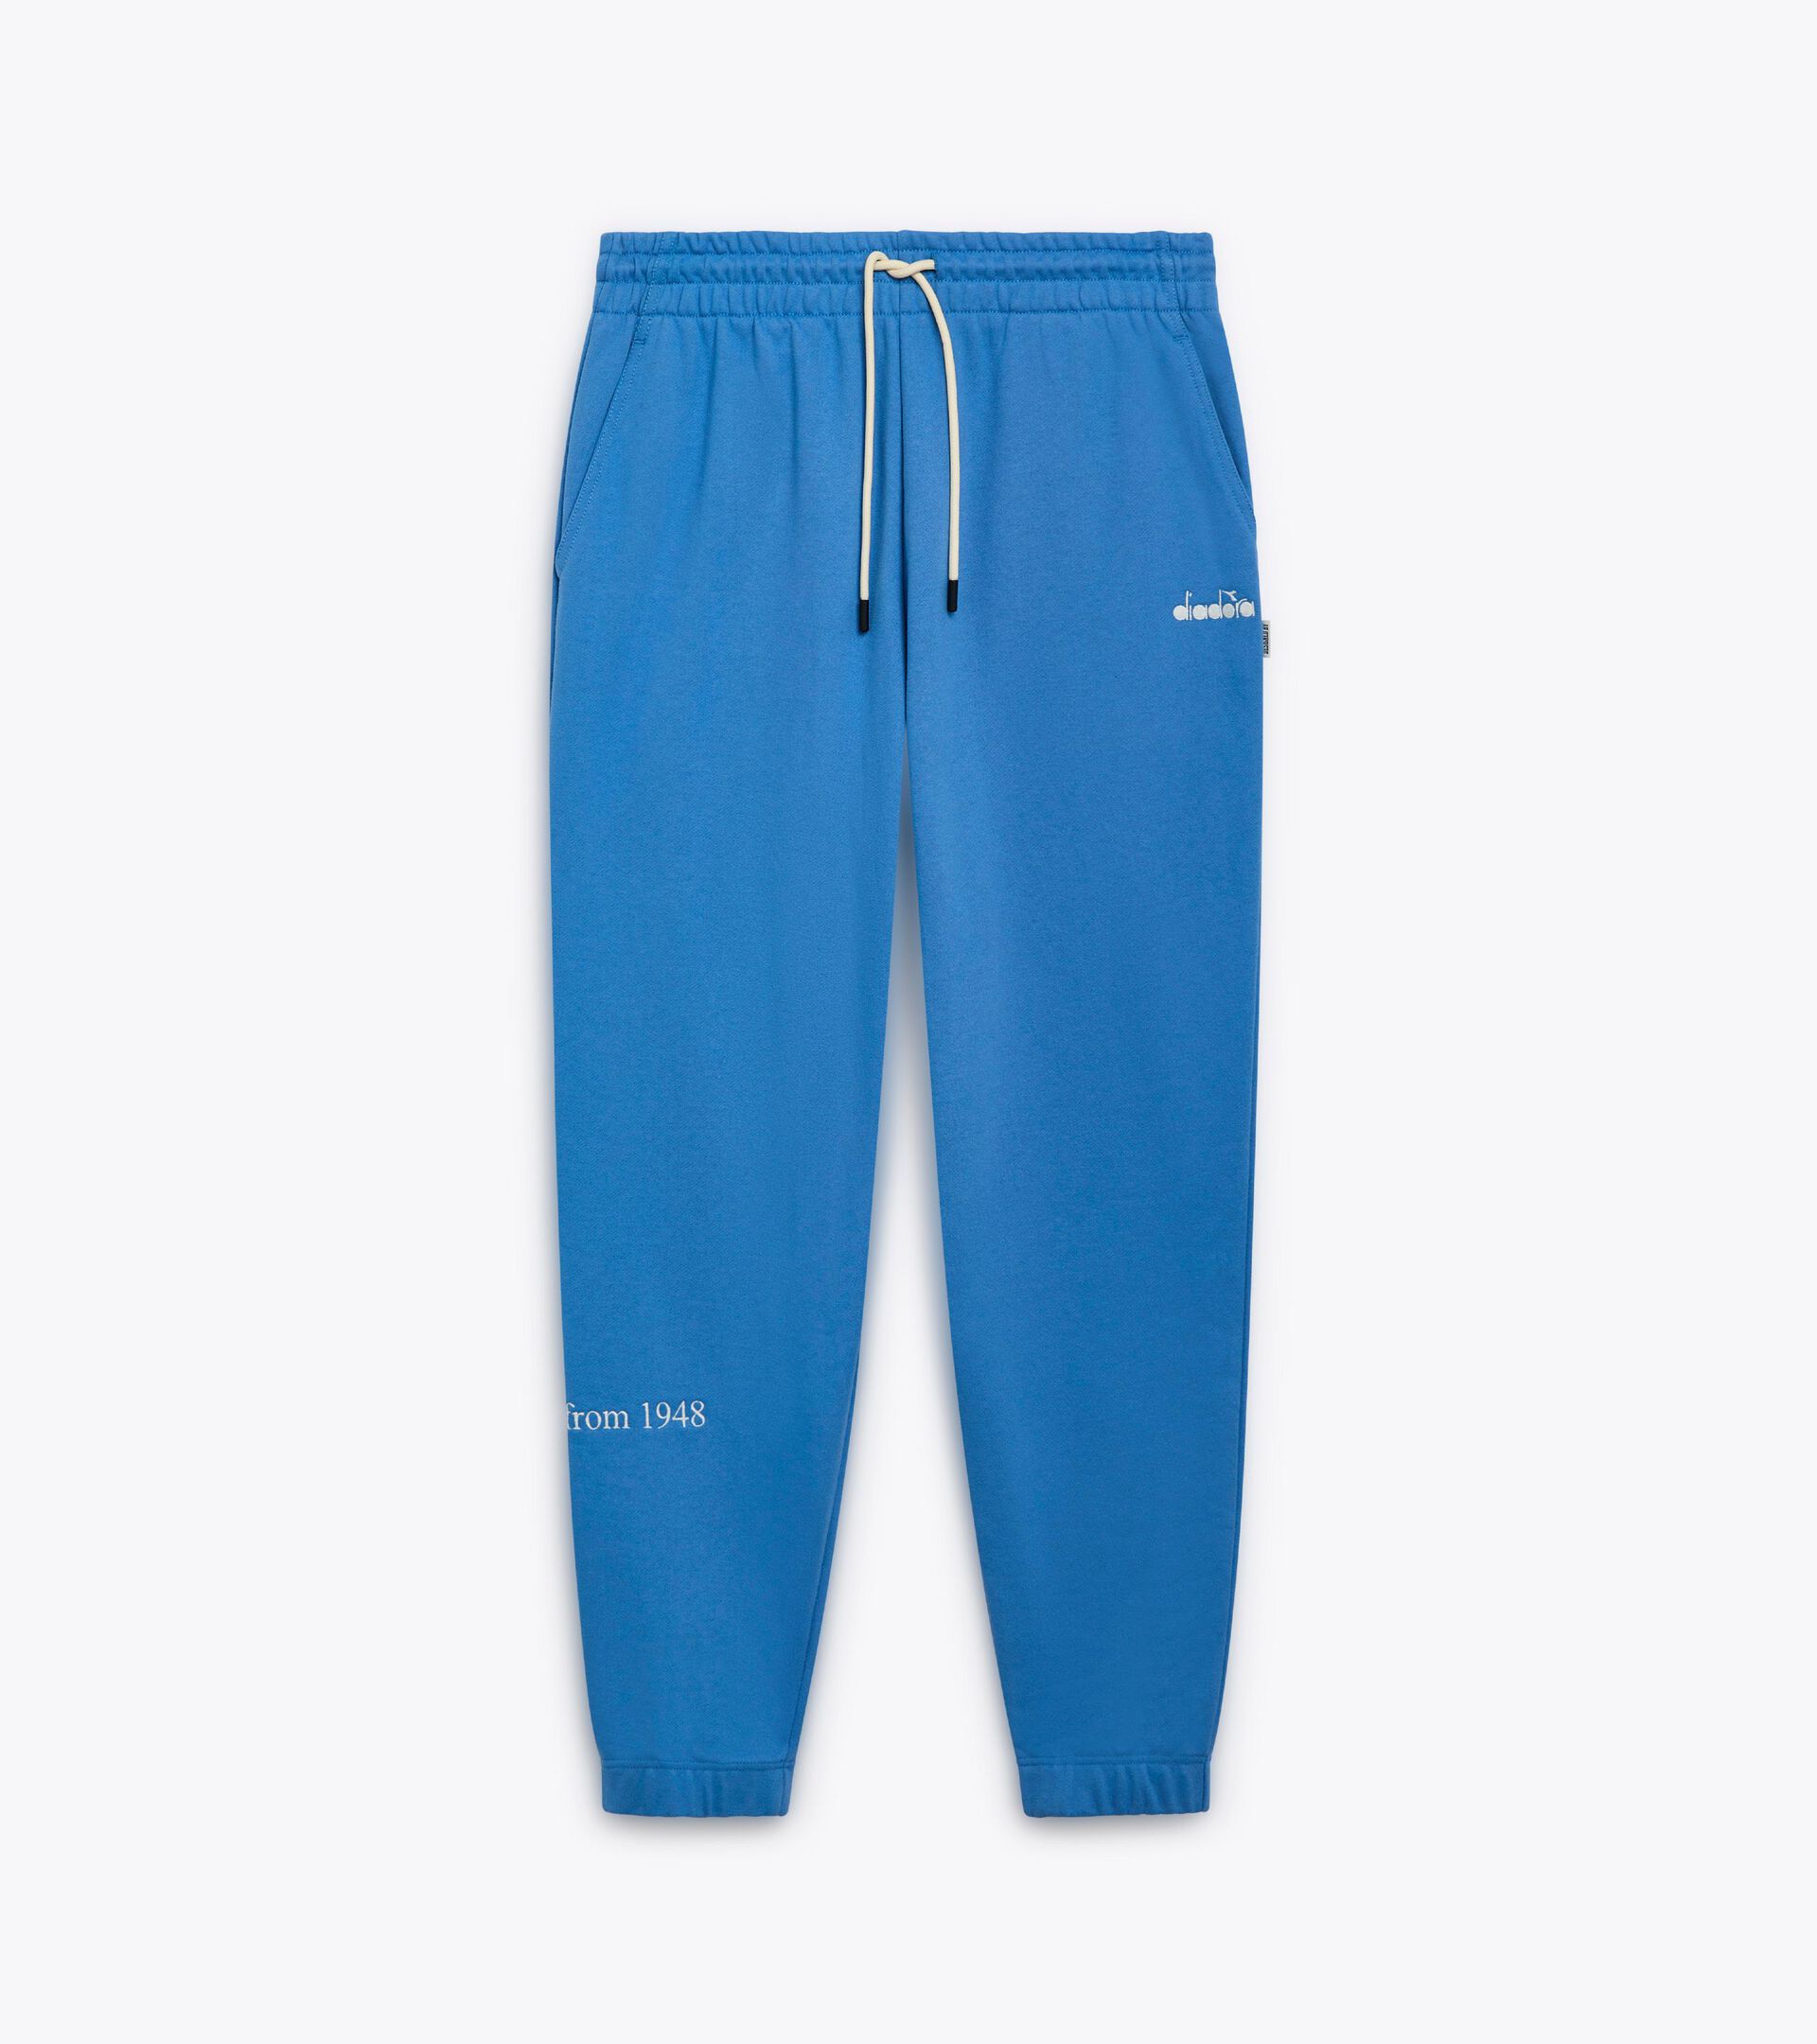 Joggers - Made in Italy - Gender Neutral JOGGER PANTS LEGACY PACIFIC COAST - Diadora